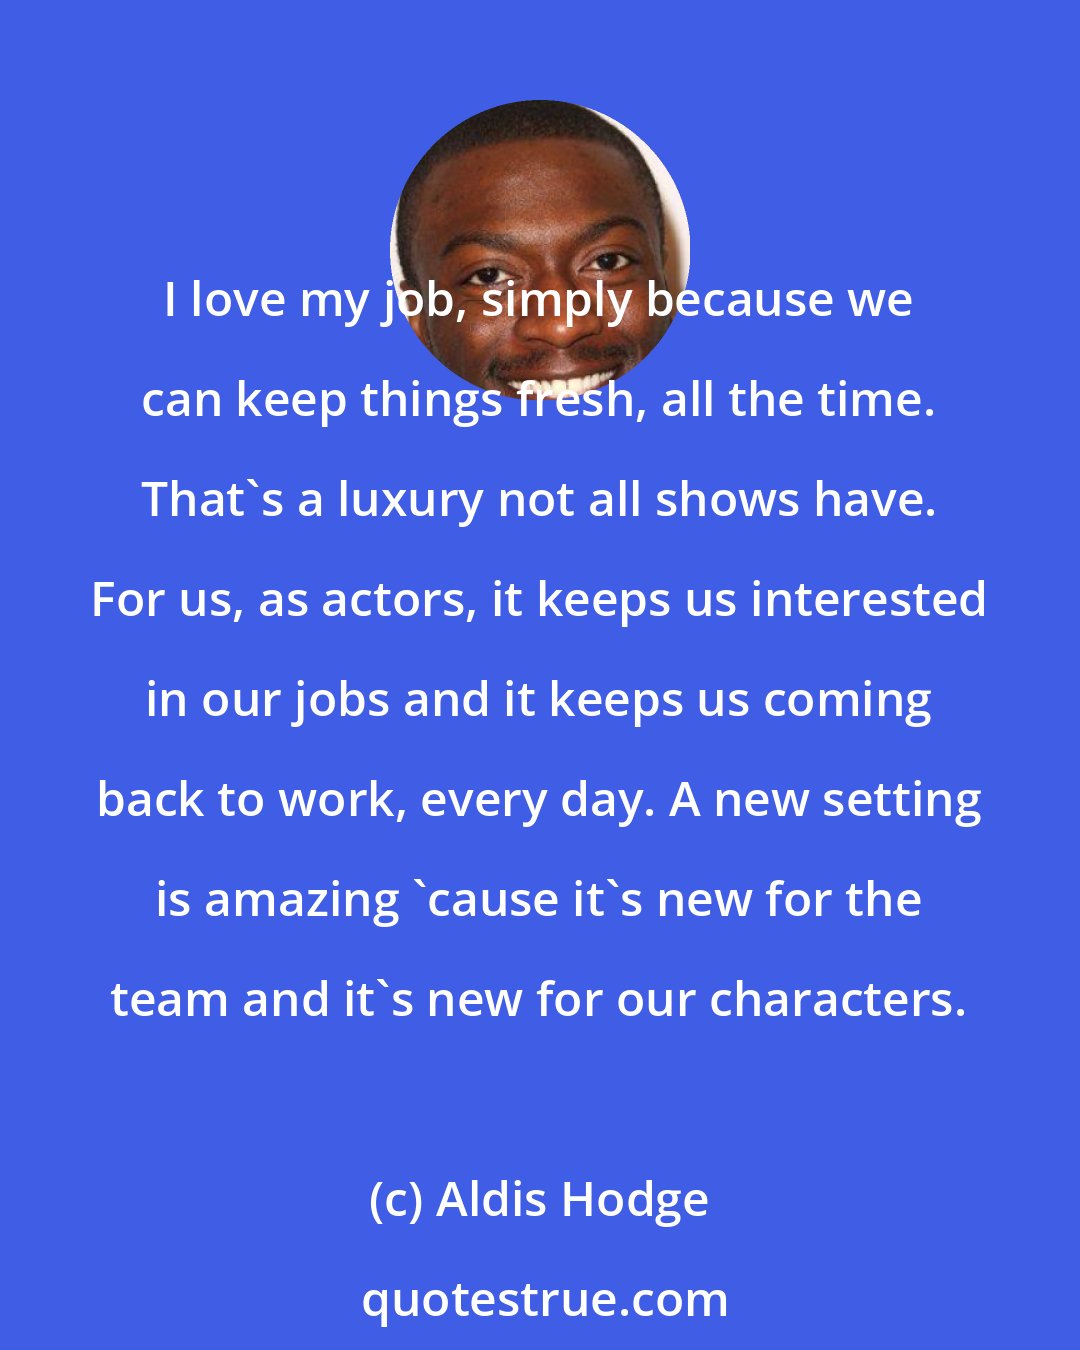 Aldis Hodge: I love my job, simply because we can keep things fresh, all the time. That's a luxury not all shows have. For us, as actors, it keeps us interested in our jobs and it keeps us coming back to work, every day. A new setting is amazing 'cause it's new for the team and it's new for our characters.